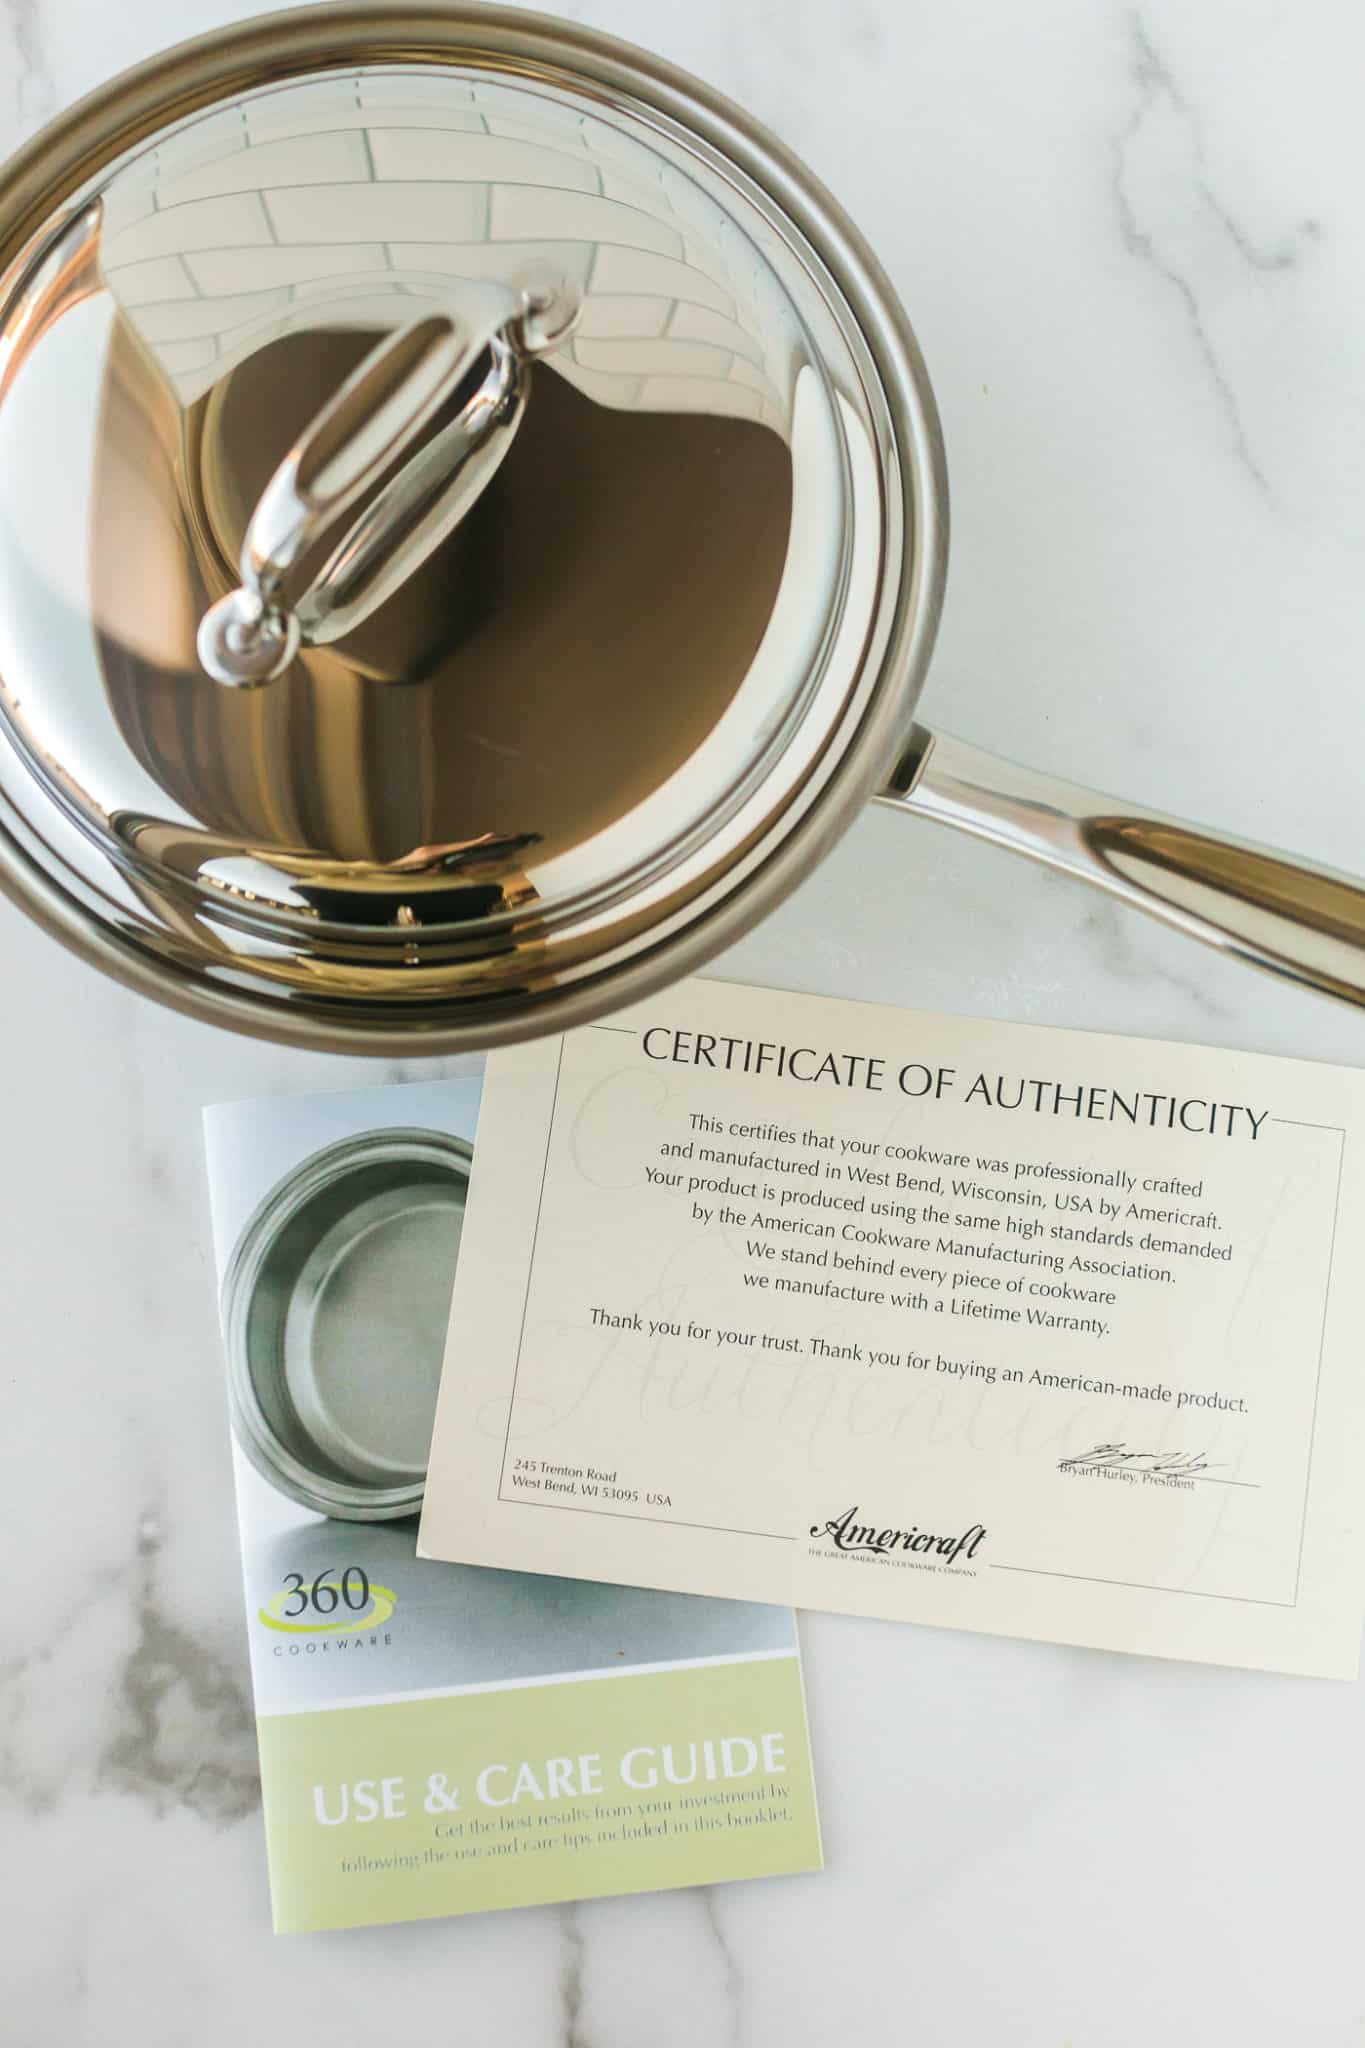 stainless steel pot with certificate of authenticity from 360 Cookware.